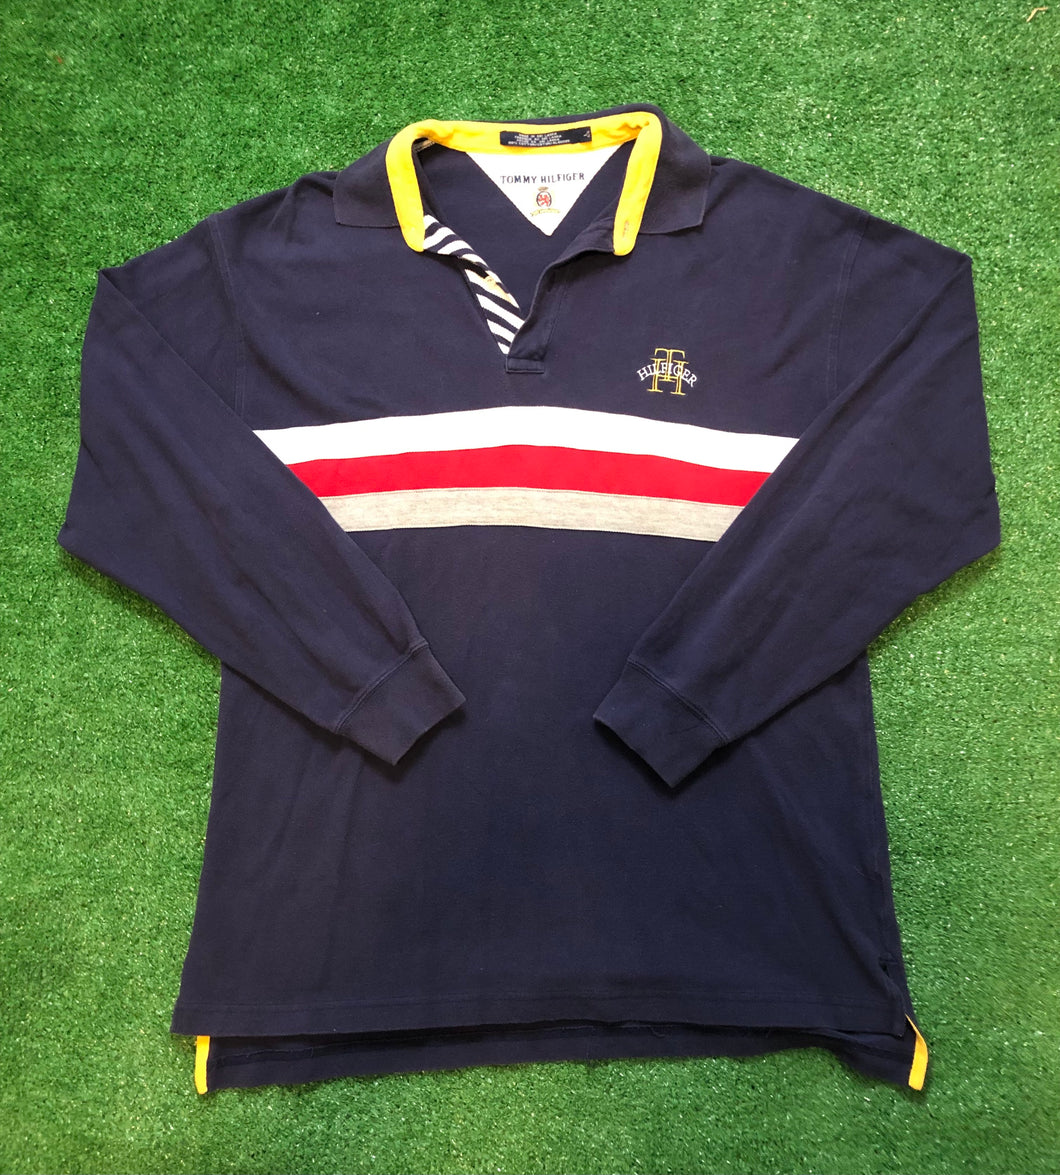 Vintage “Tommy Hilfiger” Long-sleeve Polo